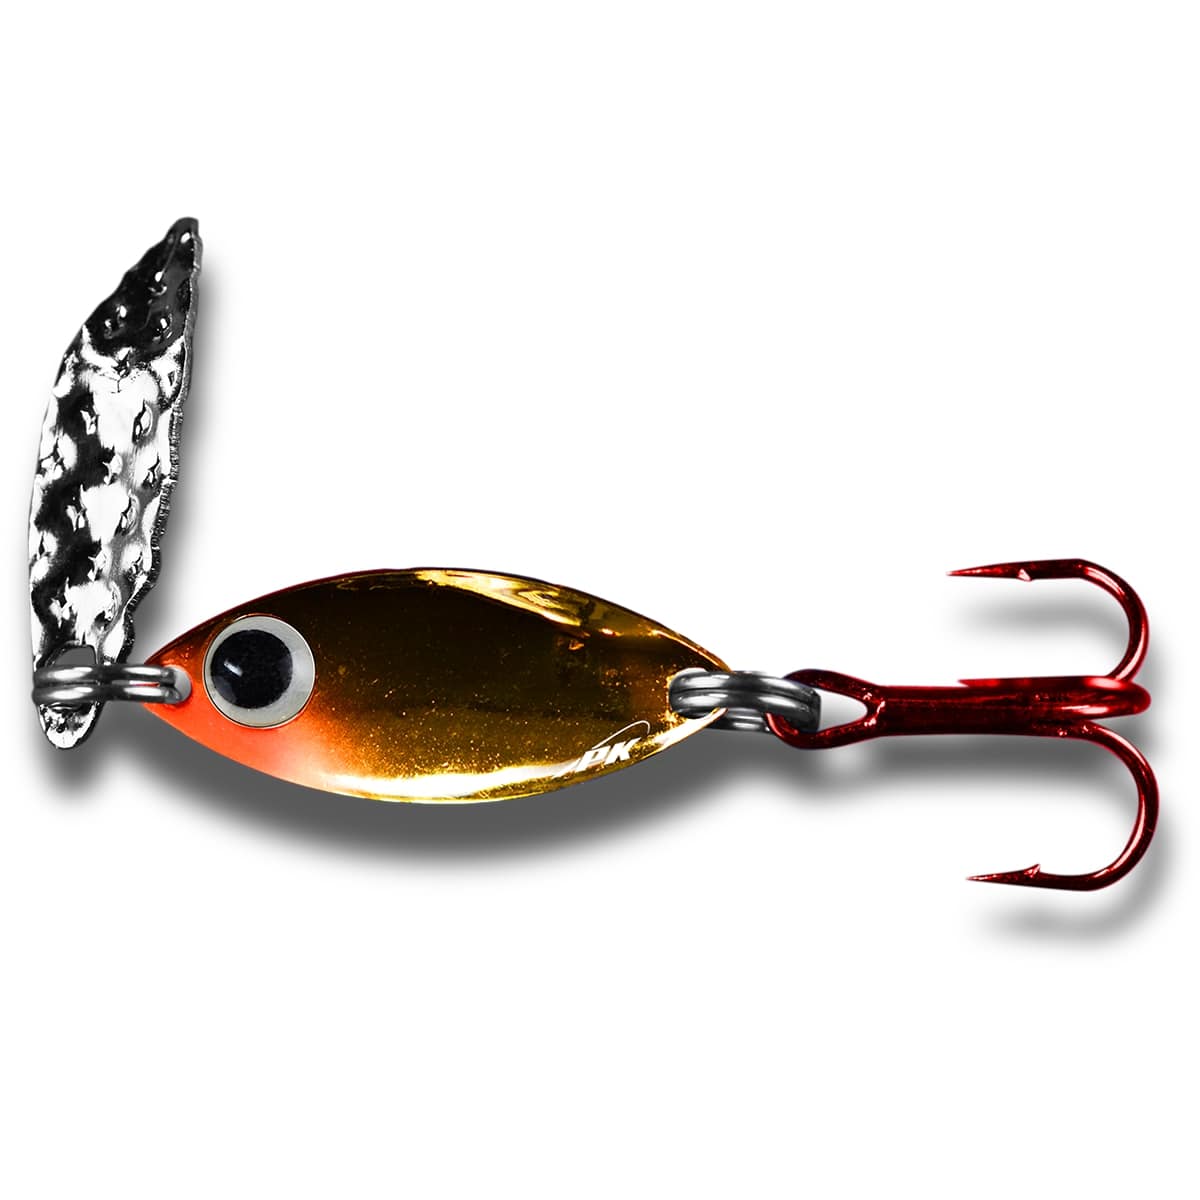 319 ICE FISHING SPOON from SHARK, galvanic,60mm,Owner,Maruto hook